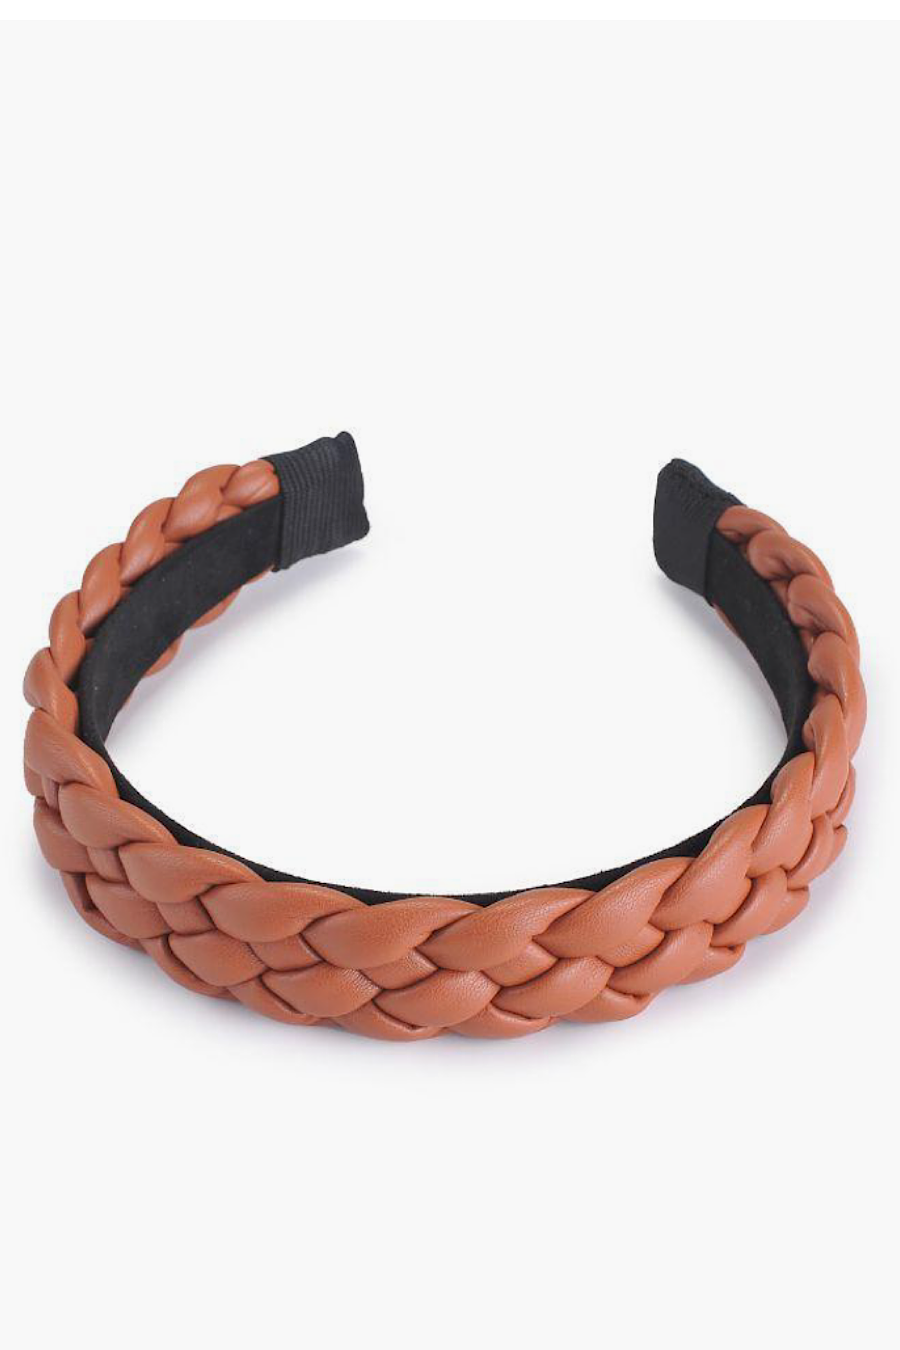 Braided Leather Headband in Cocoa or Black